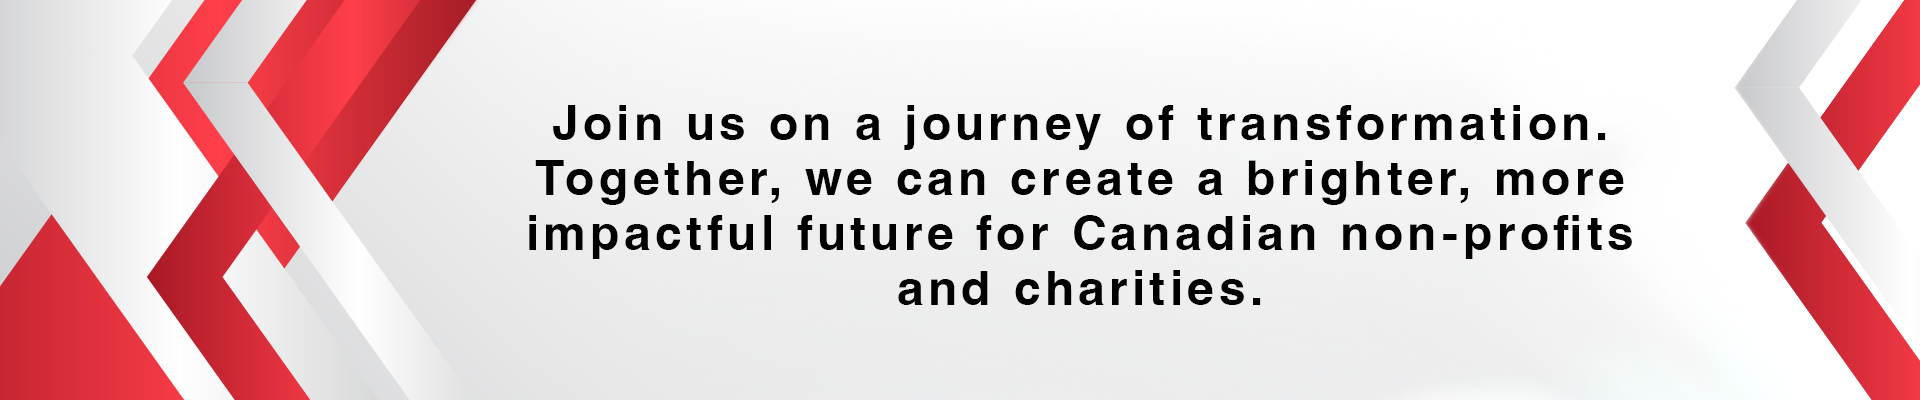 Join us on a journey of transformation. Together, we can create a brighter, more impactful future for Canadian non-profits and charities.